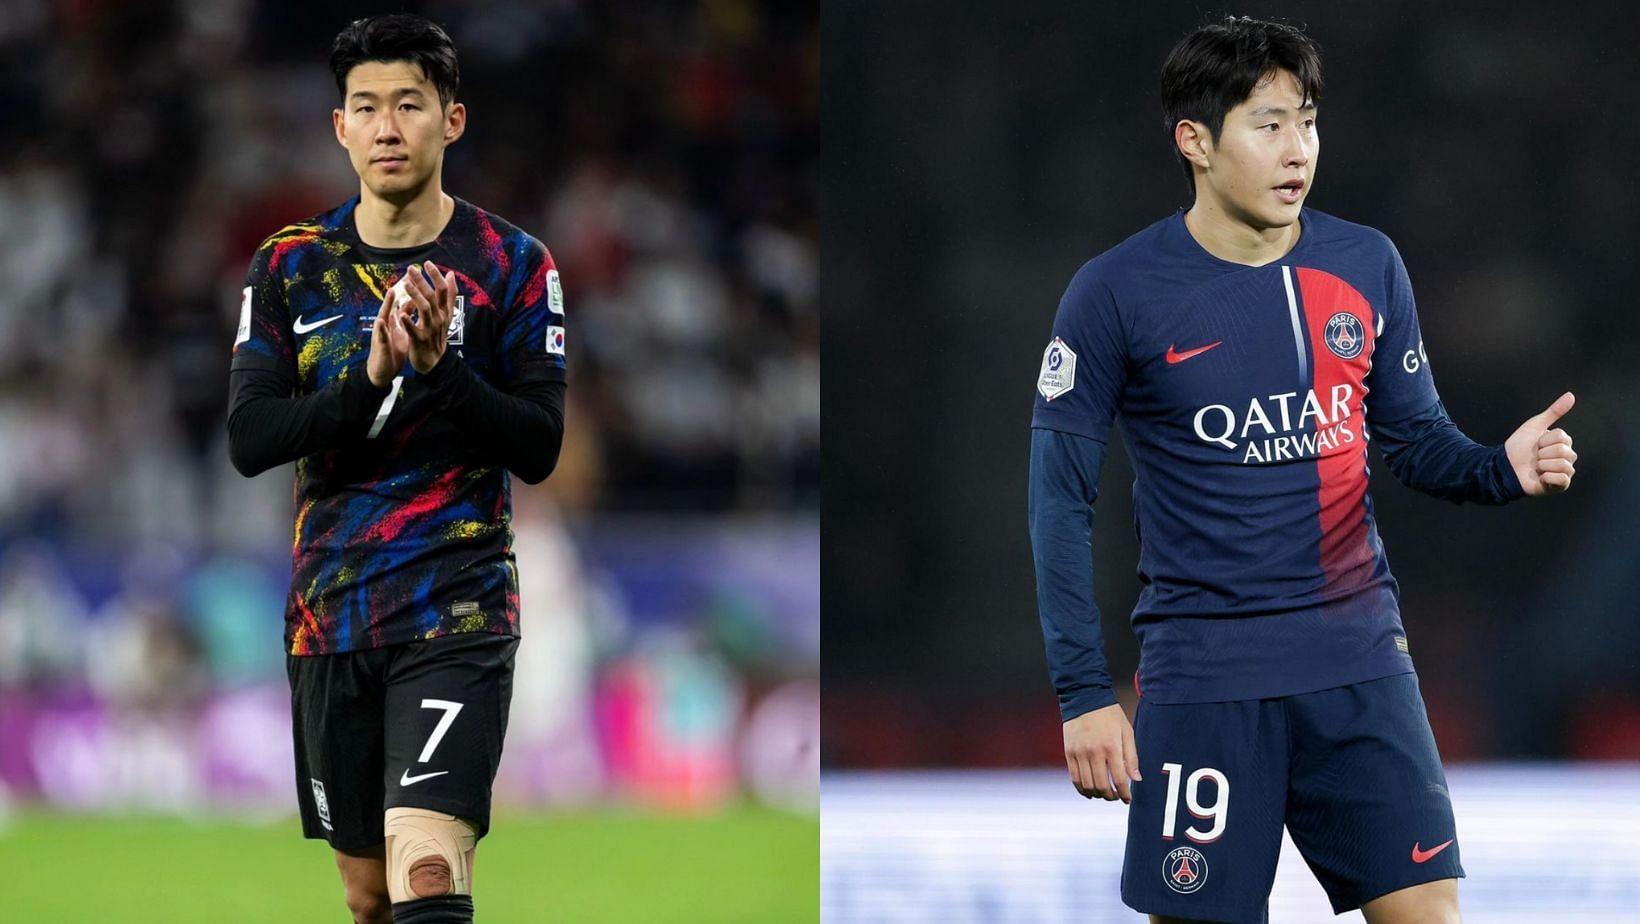 What happened between Lee Kang-in (R) and Son Heung-min (L)? South Korean soccer team met with allegations of a rift and discord. (Images via Instagram/@hm_son7 &amp; @kanginleeoficial)